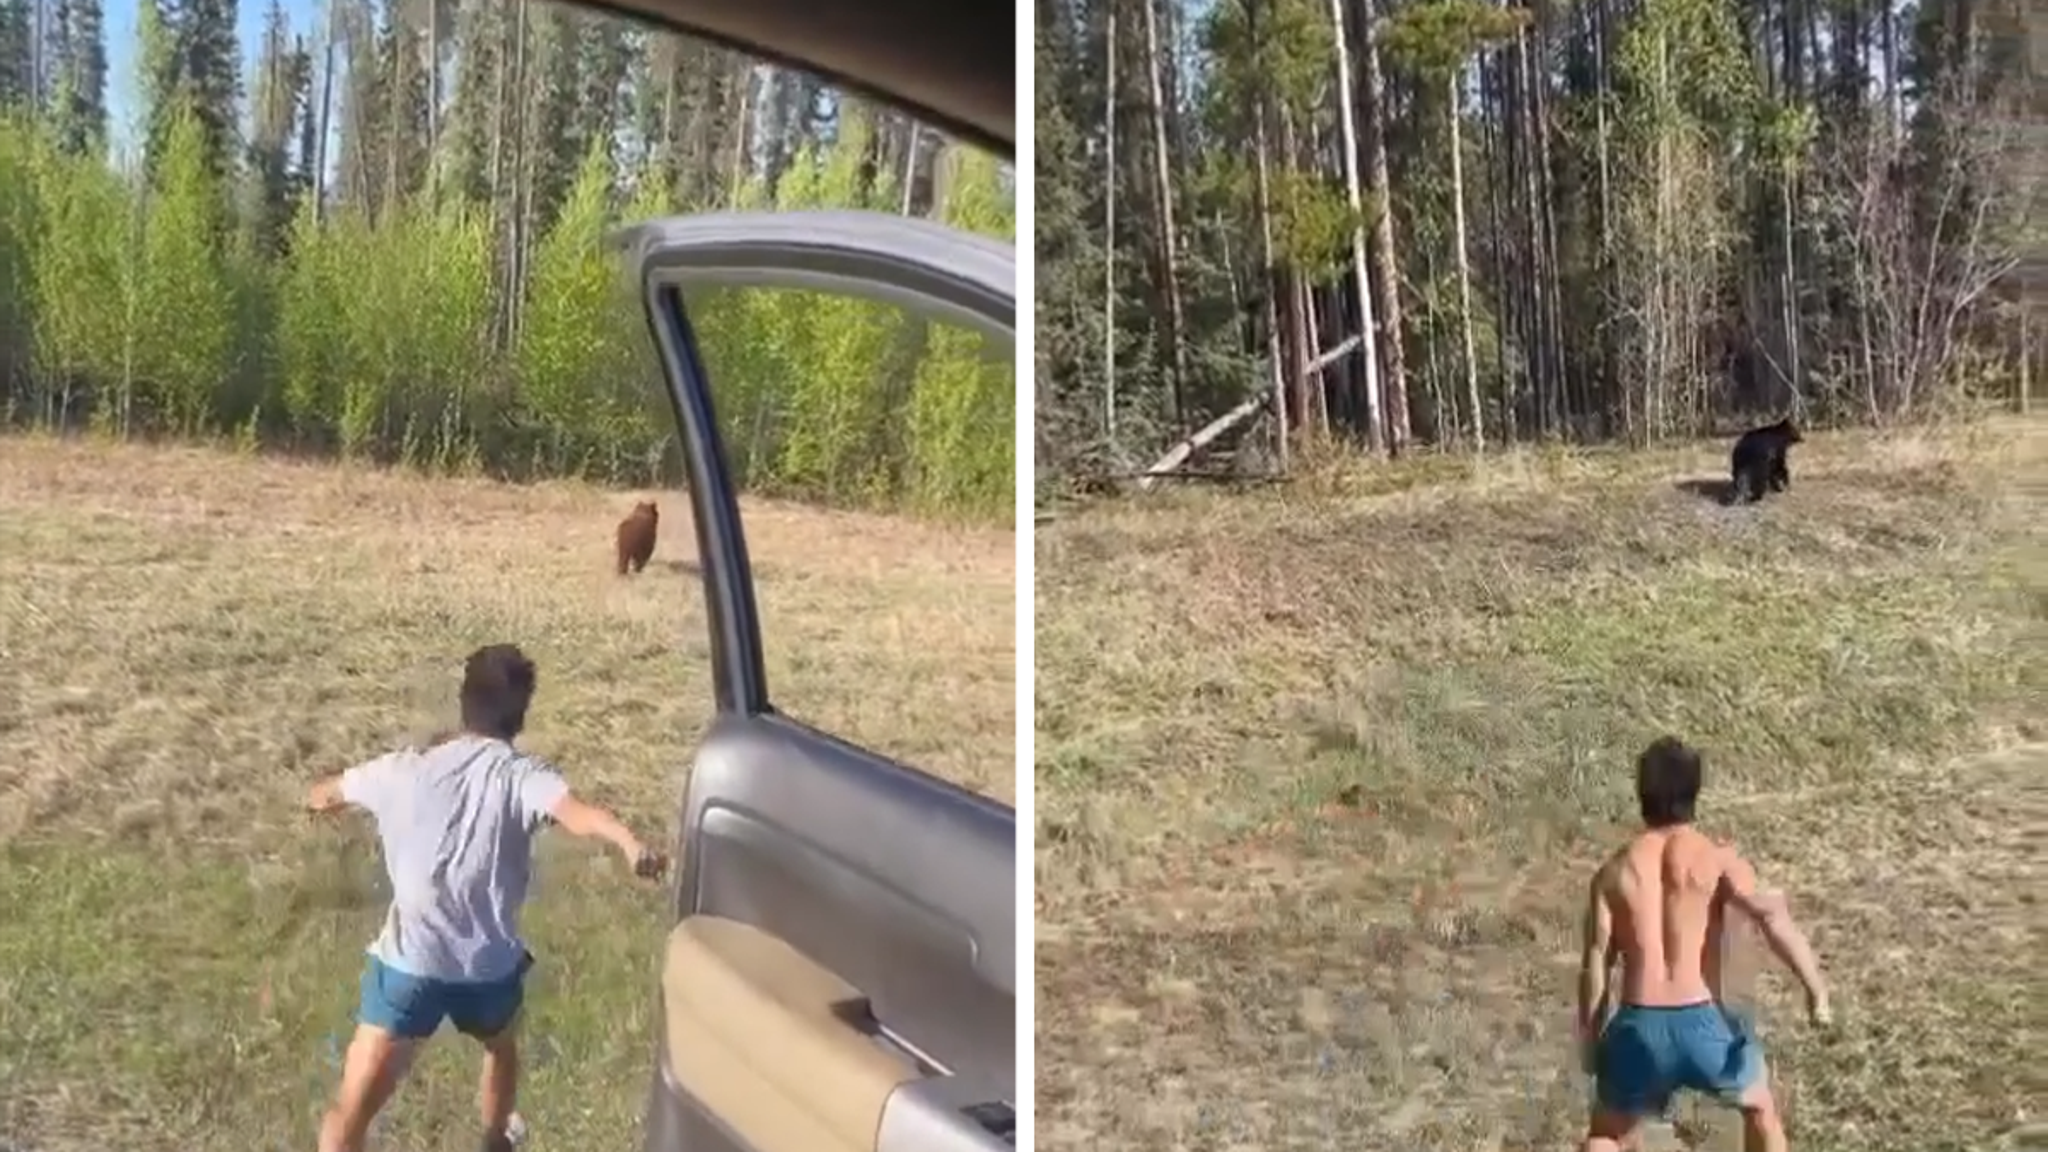 Yellowstone tourist facing legal trouble after harassing bear on video